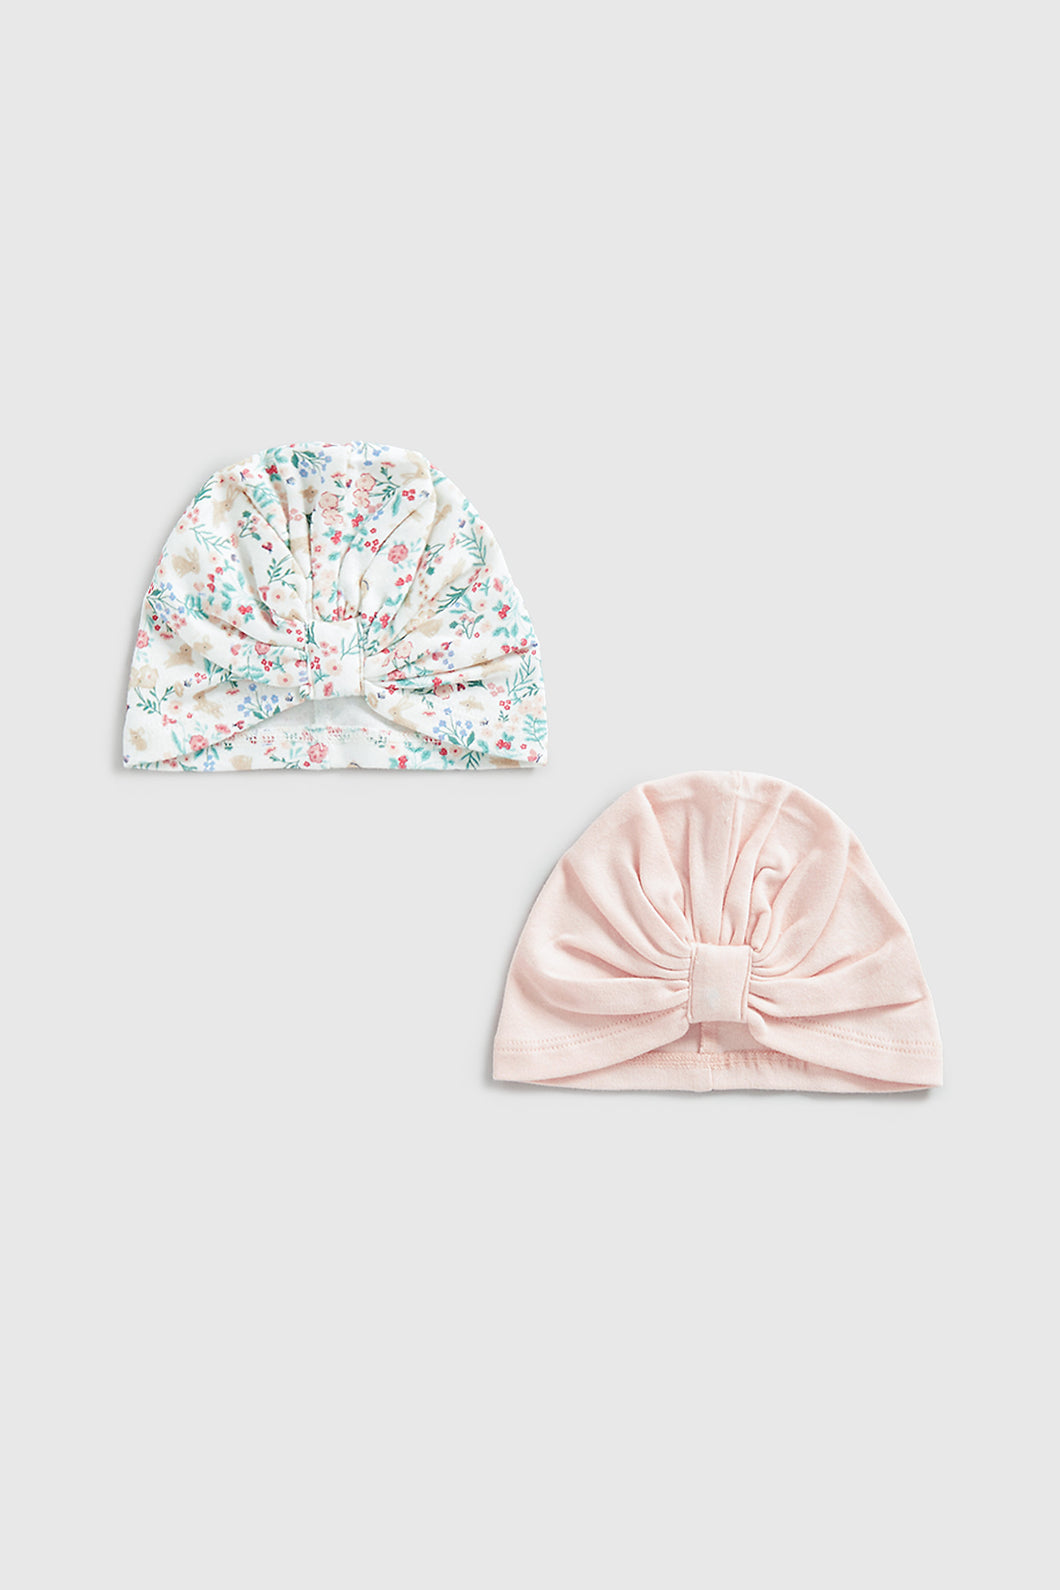 Mothercare In the Garden Baby Hats - 2 Pack